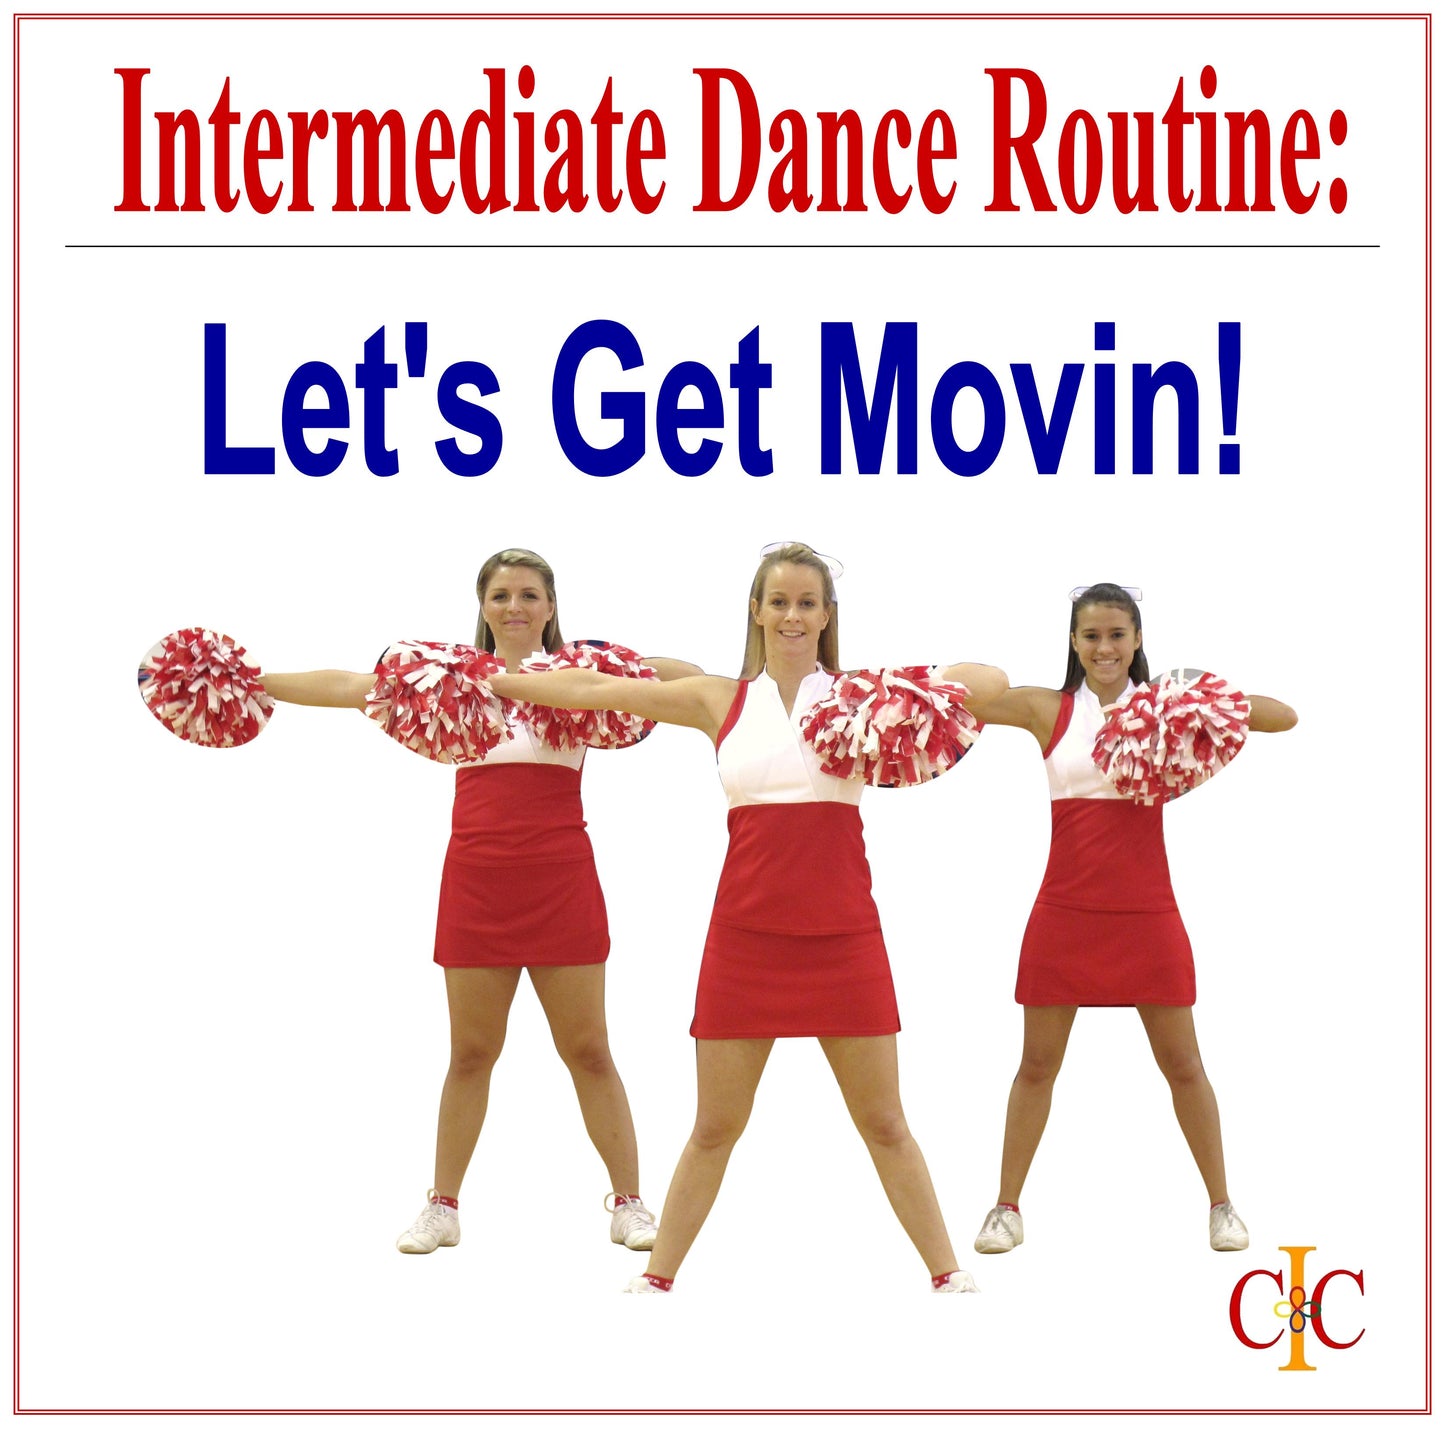 Intermediate Dance Routine - Dance Let's Get Movin - Cheer and Dance On Demand